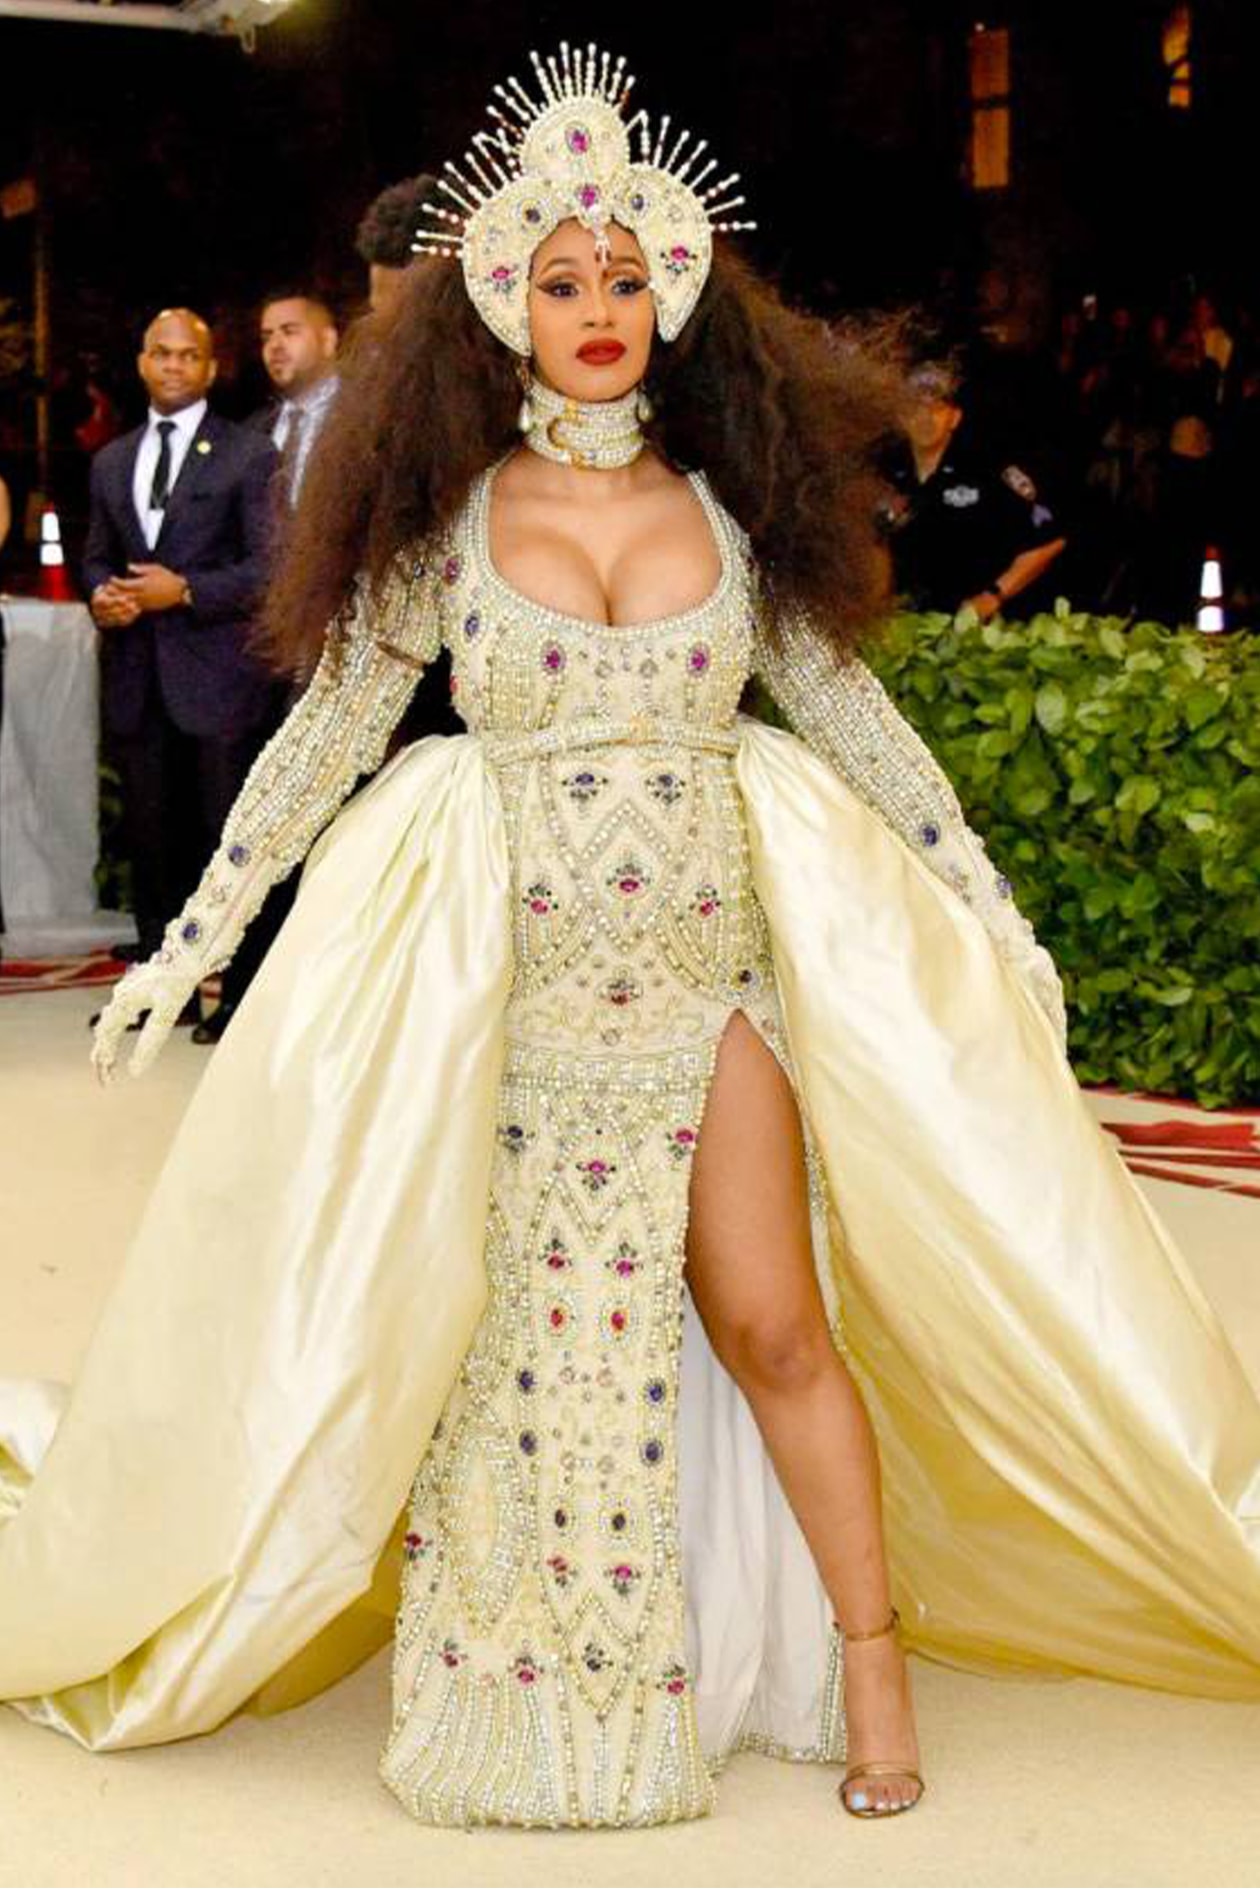 Cardi B's Best Outfits of 2021: From Surrealist to Fearless